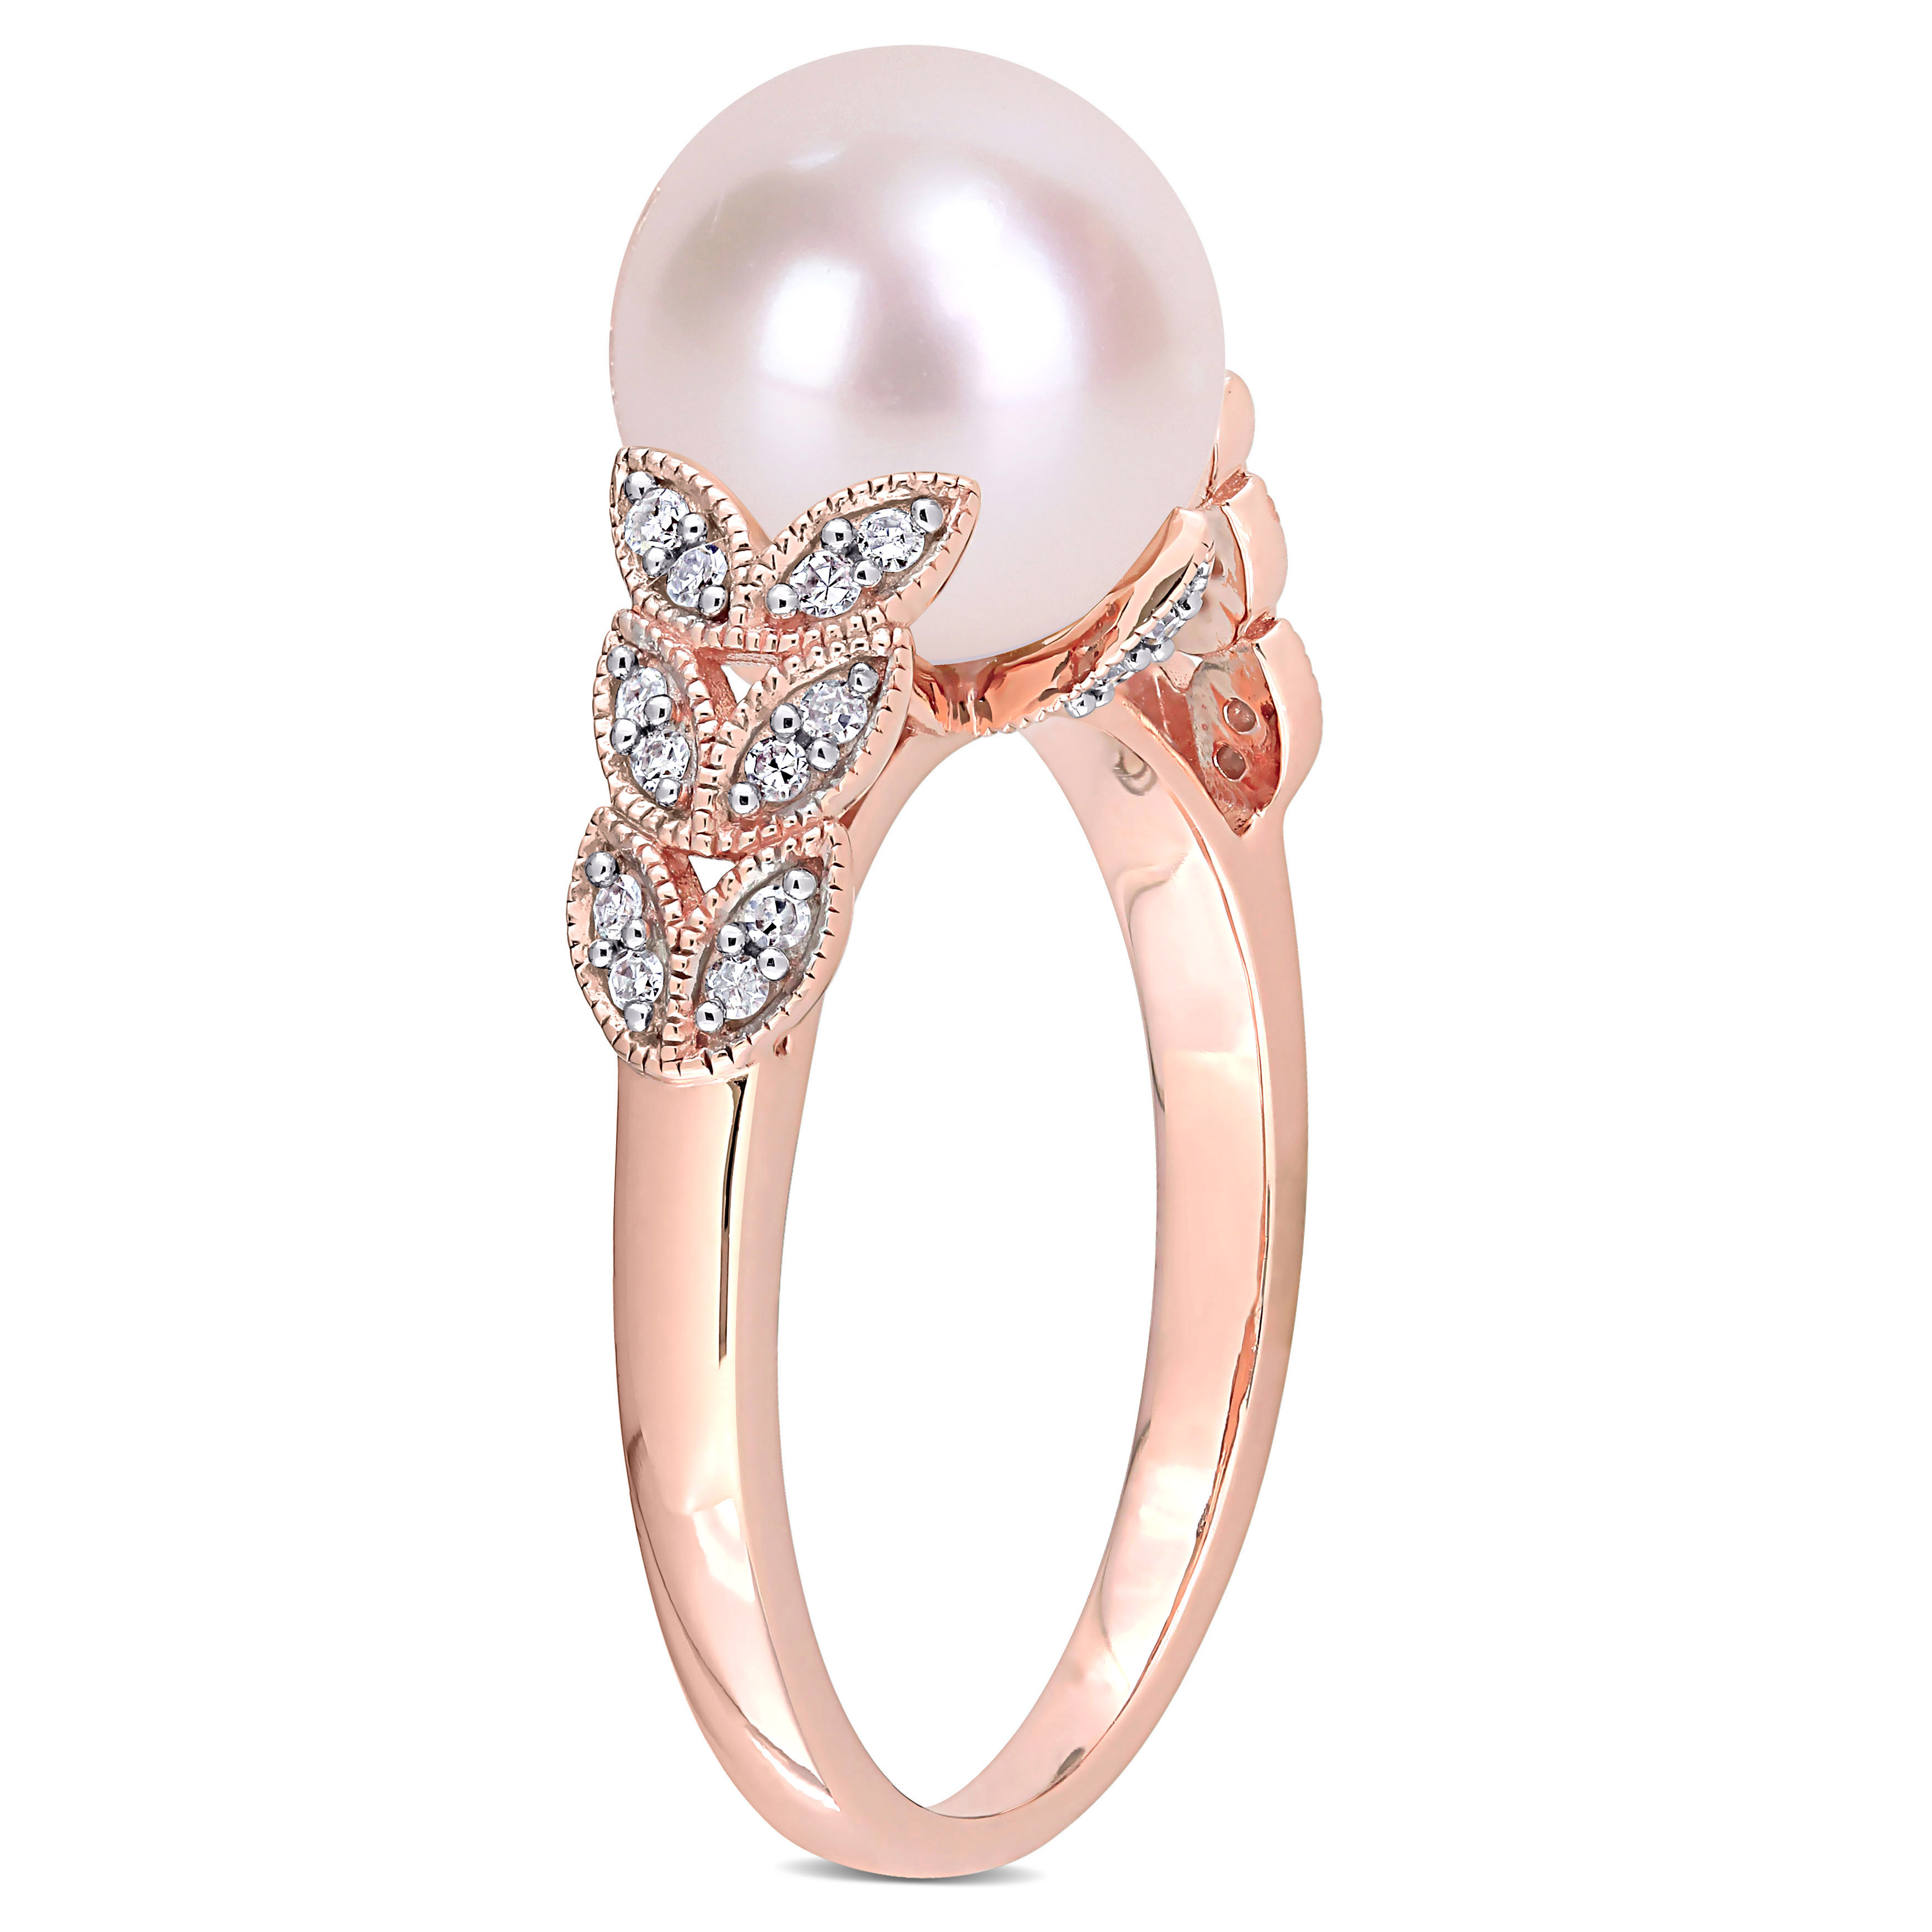 9.5-10mm Cultured Freshwater Pearl and 1/6 CT TW Diamond Leaf Ring in 10k Rose Gold